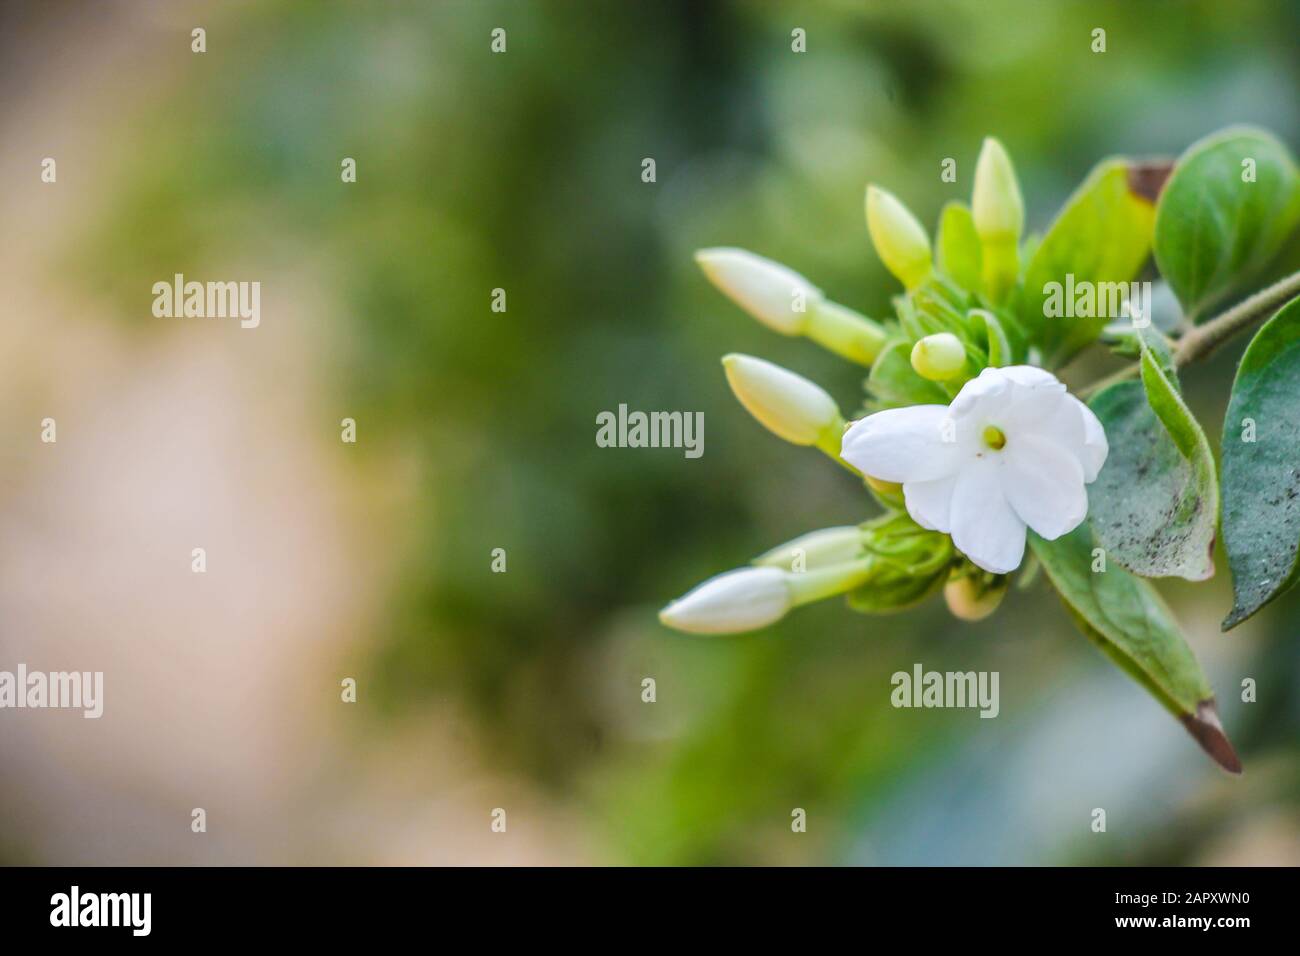 Branch of white star jasmine with green leaf. Macro photography or closeup with blur background. Stock Photo